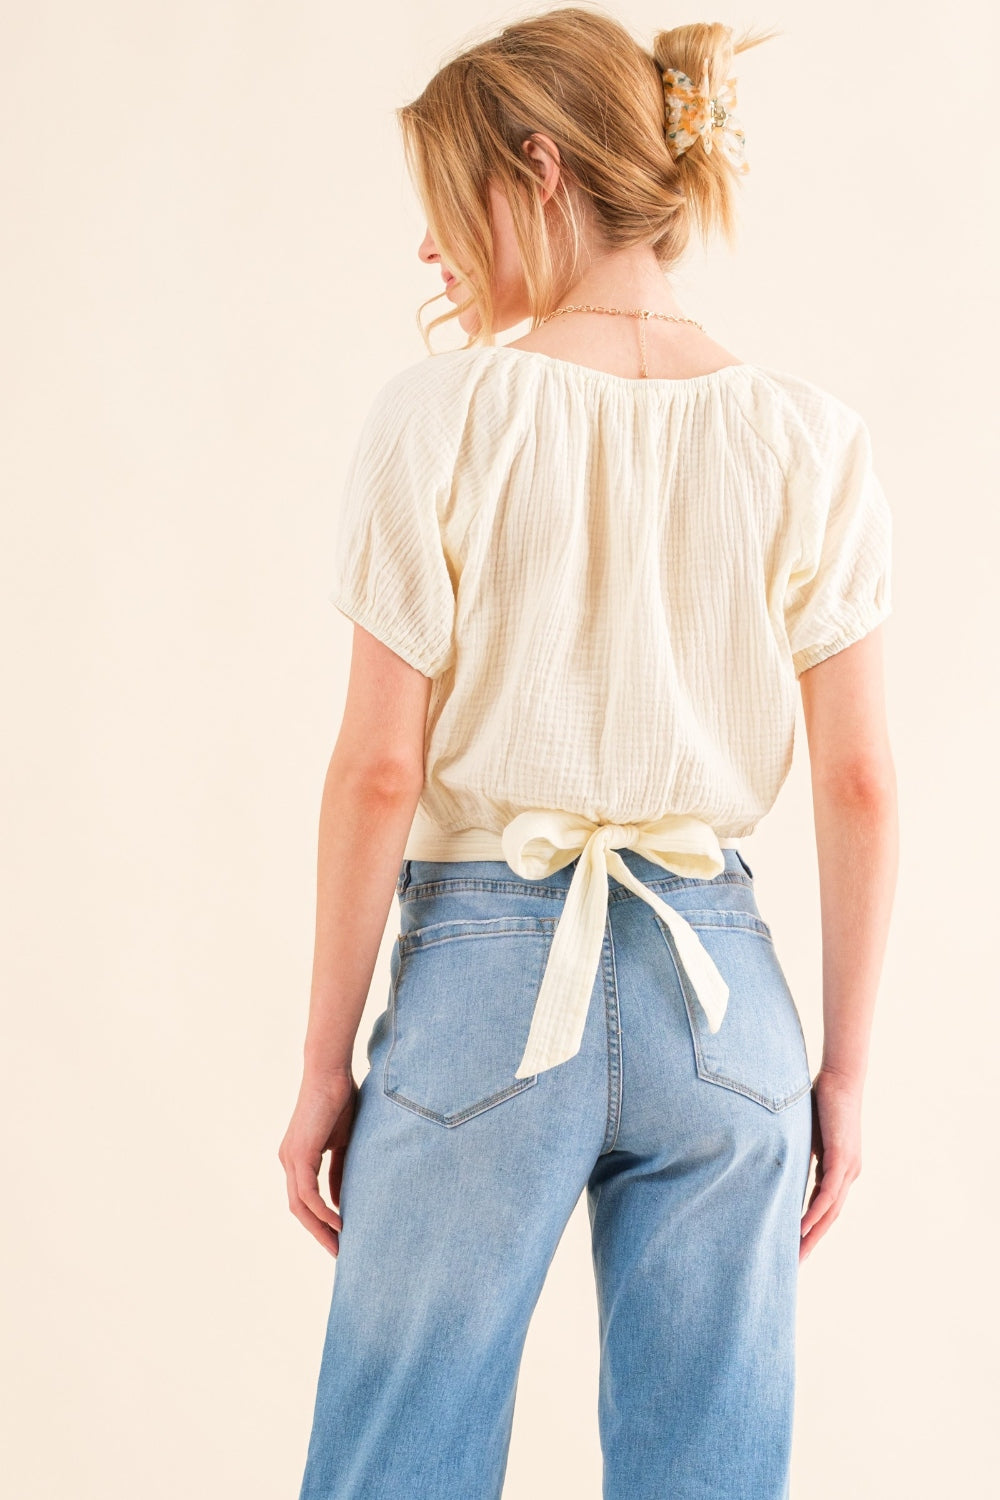 This Cotton Gauze Back Waist Tie Cropped Top is a stylish and versatile piece for your wardrobe. The back waist tie adds a unique touch to the design. Made with lightweight cotton gauze fabric, it is comfortable to wear in any season.  S - XL